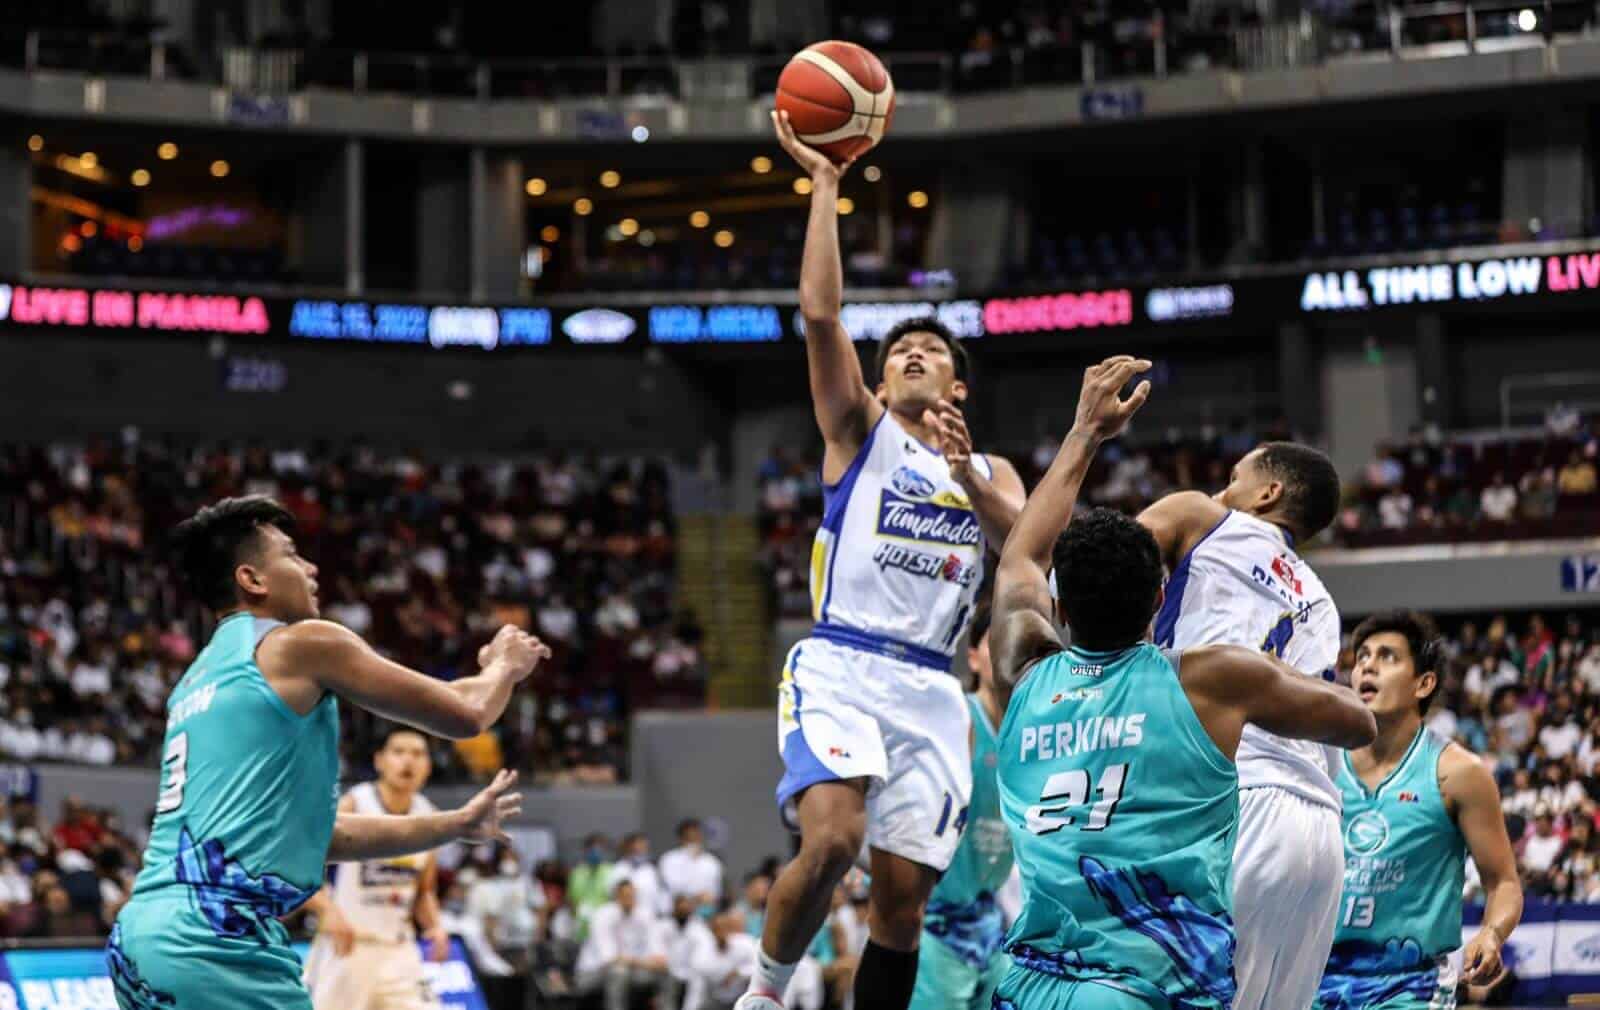 A basketball player fiercely blocks a shot during an Undermanned Magnolia victory in the PBA Philippine Cup.